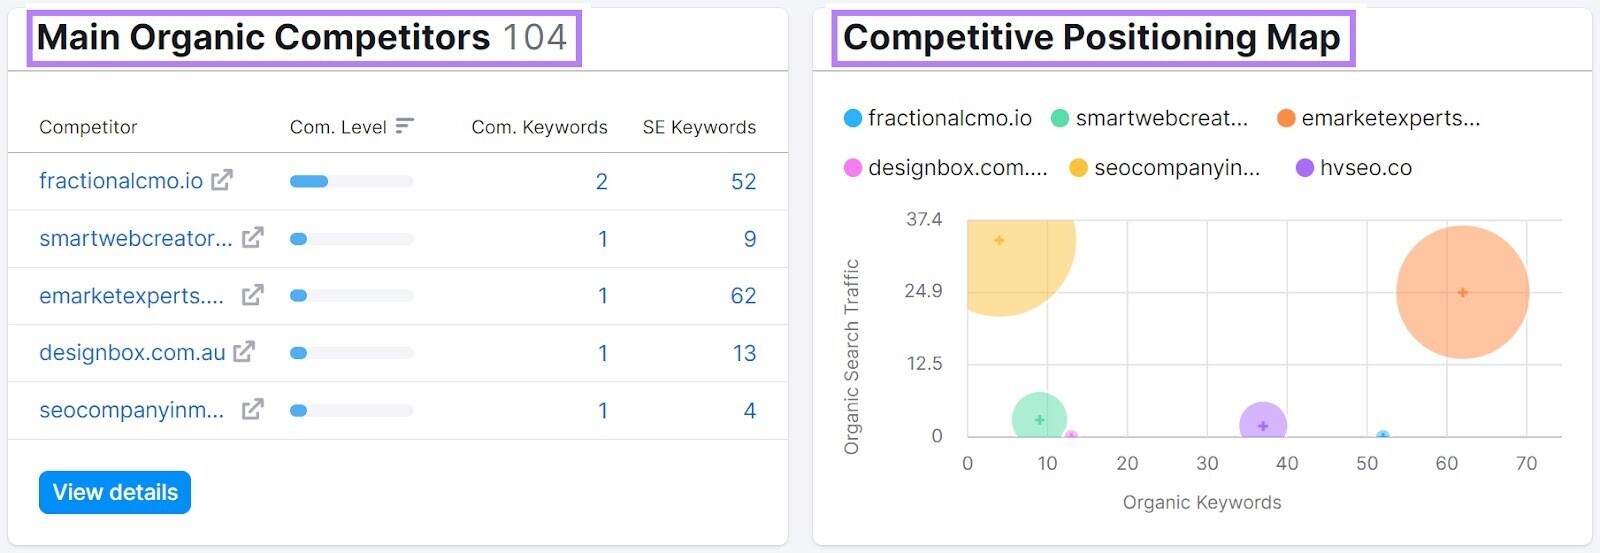 The main organic competitors and competitive map sections of the same report